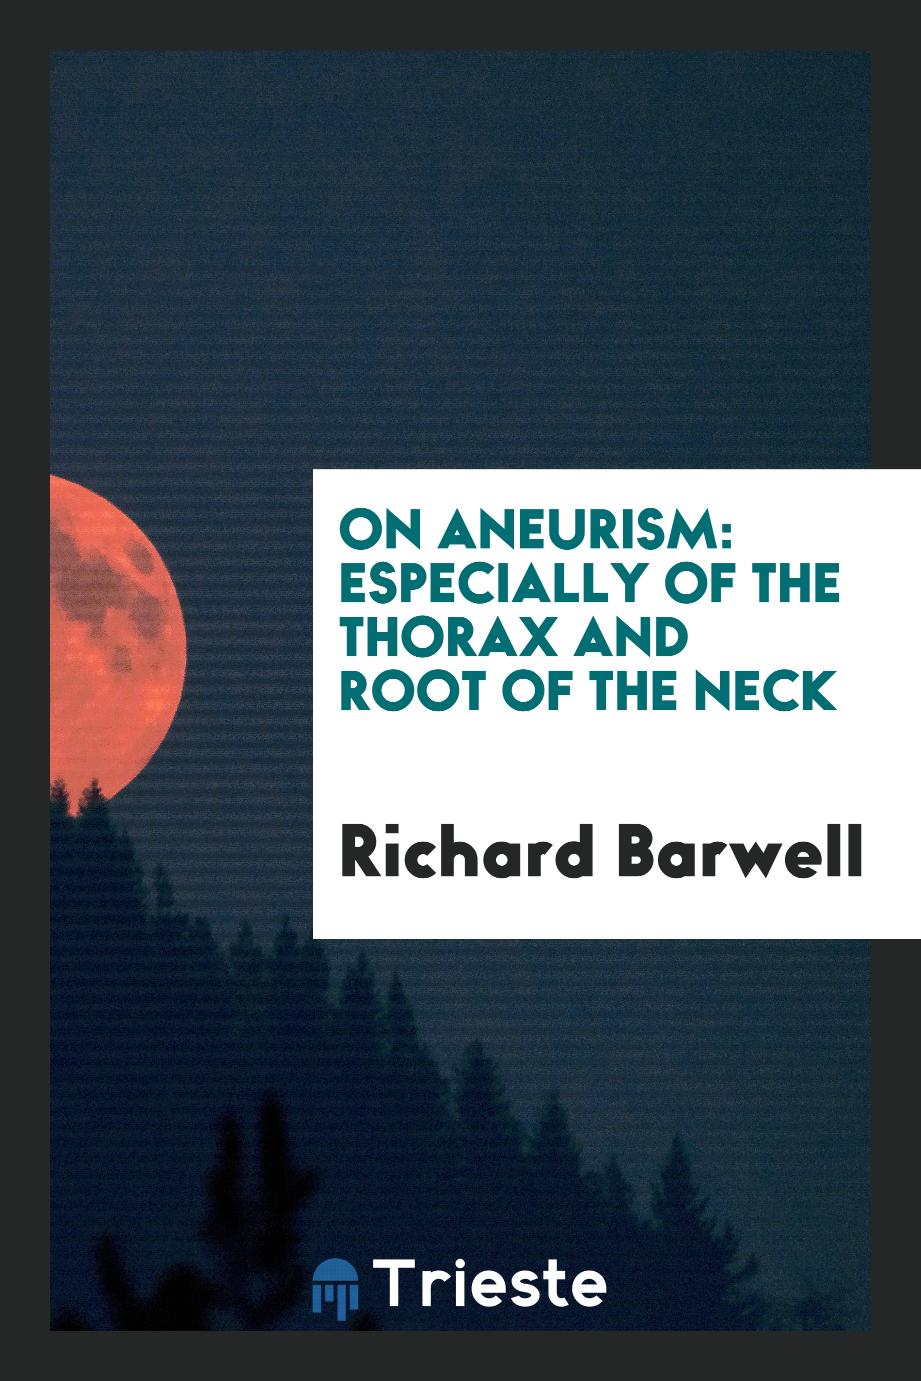 On Aneurism: Especially of the Thorax and Root of the Neck